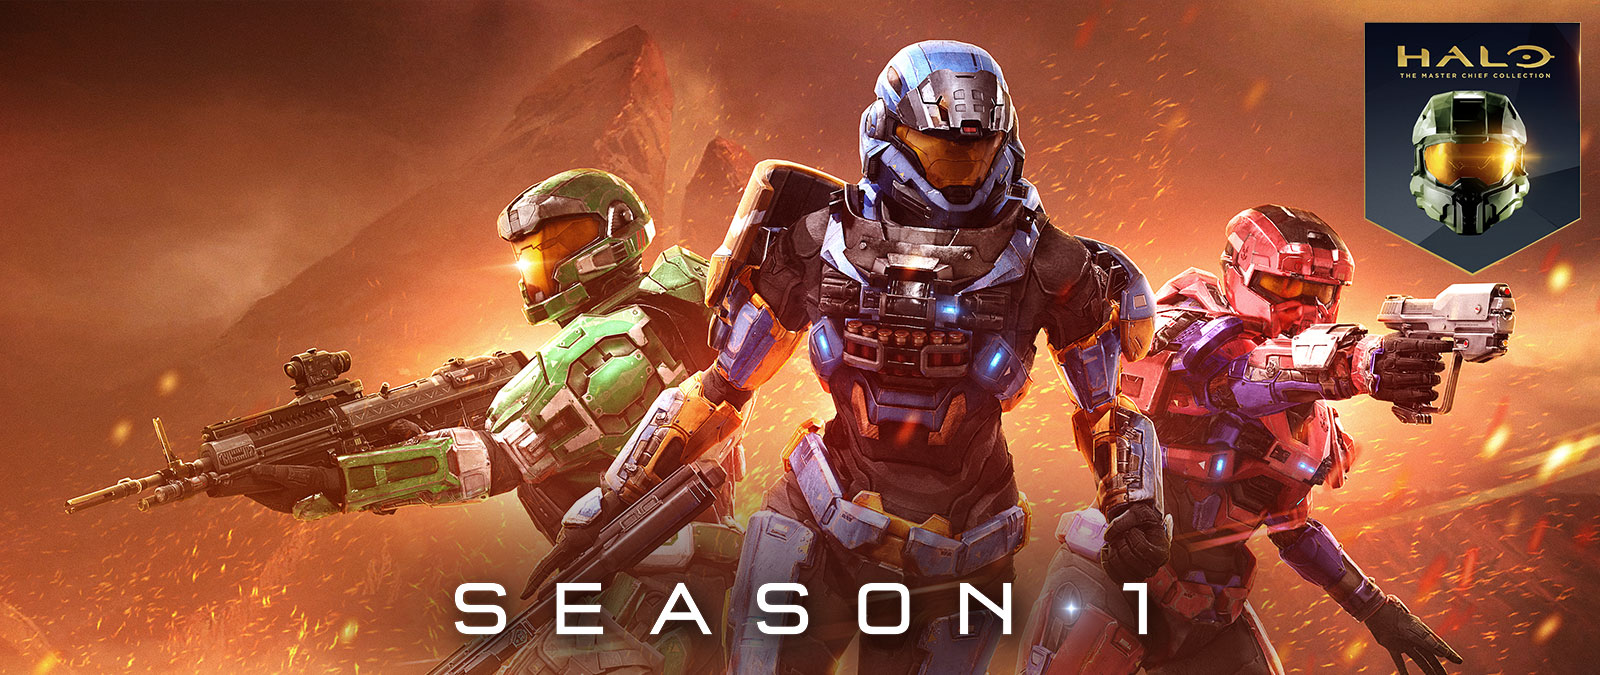 Halo: The Master Chief Collection, Season 1, 3 Characters from Halo: Reach stand together in a fiery landscape